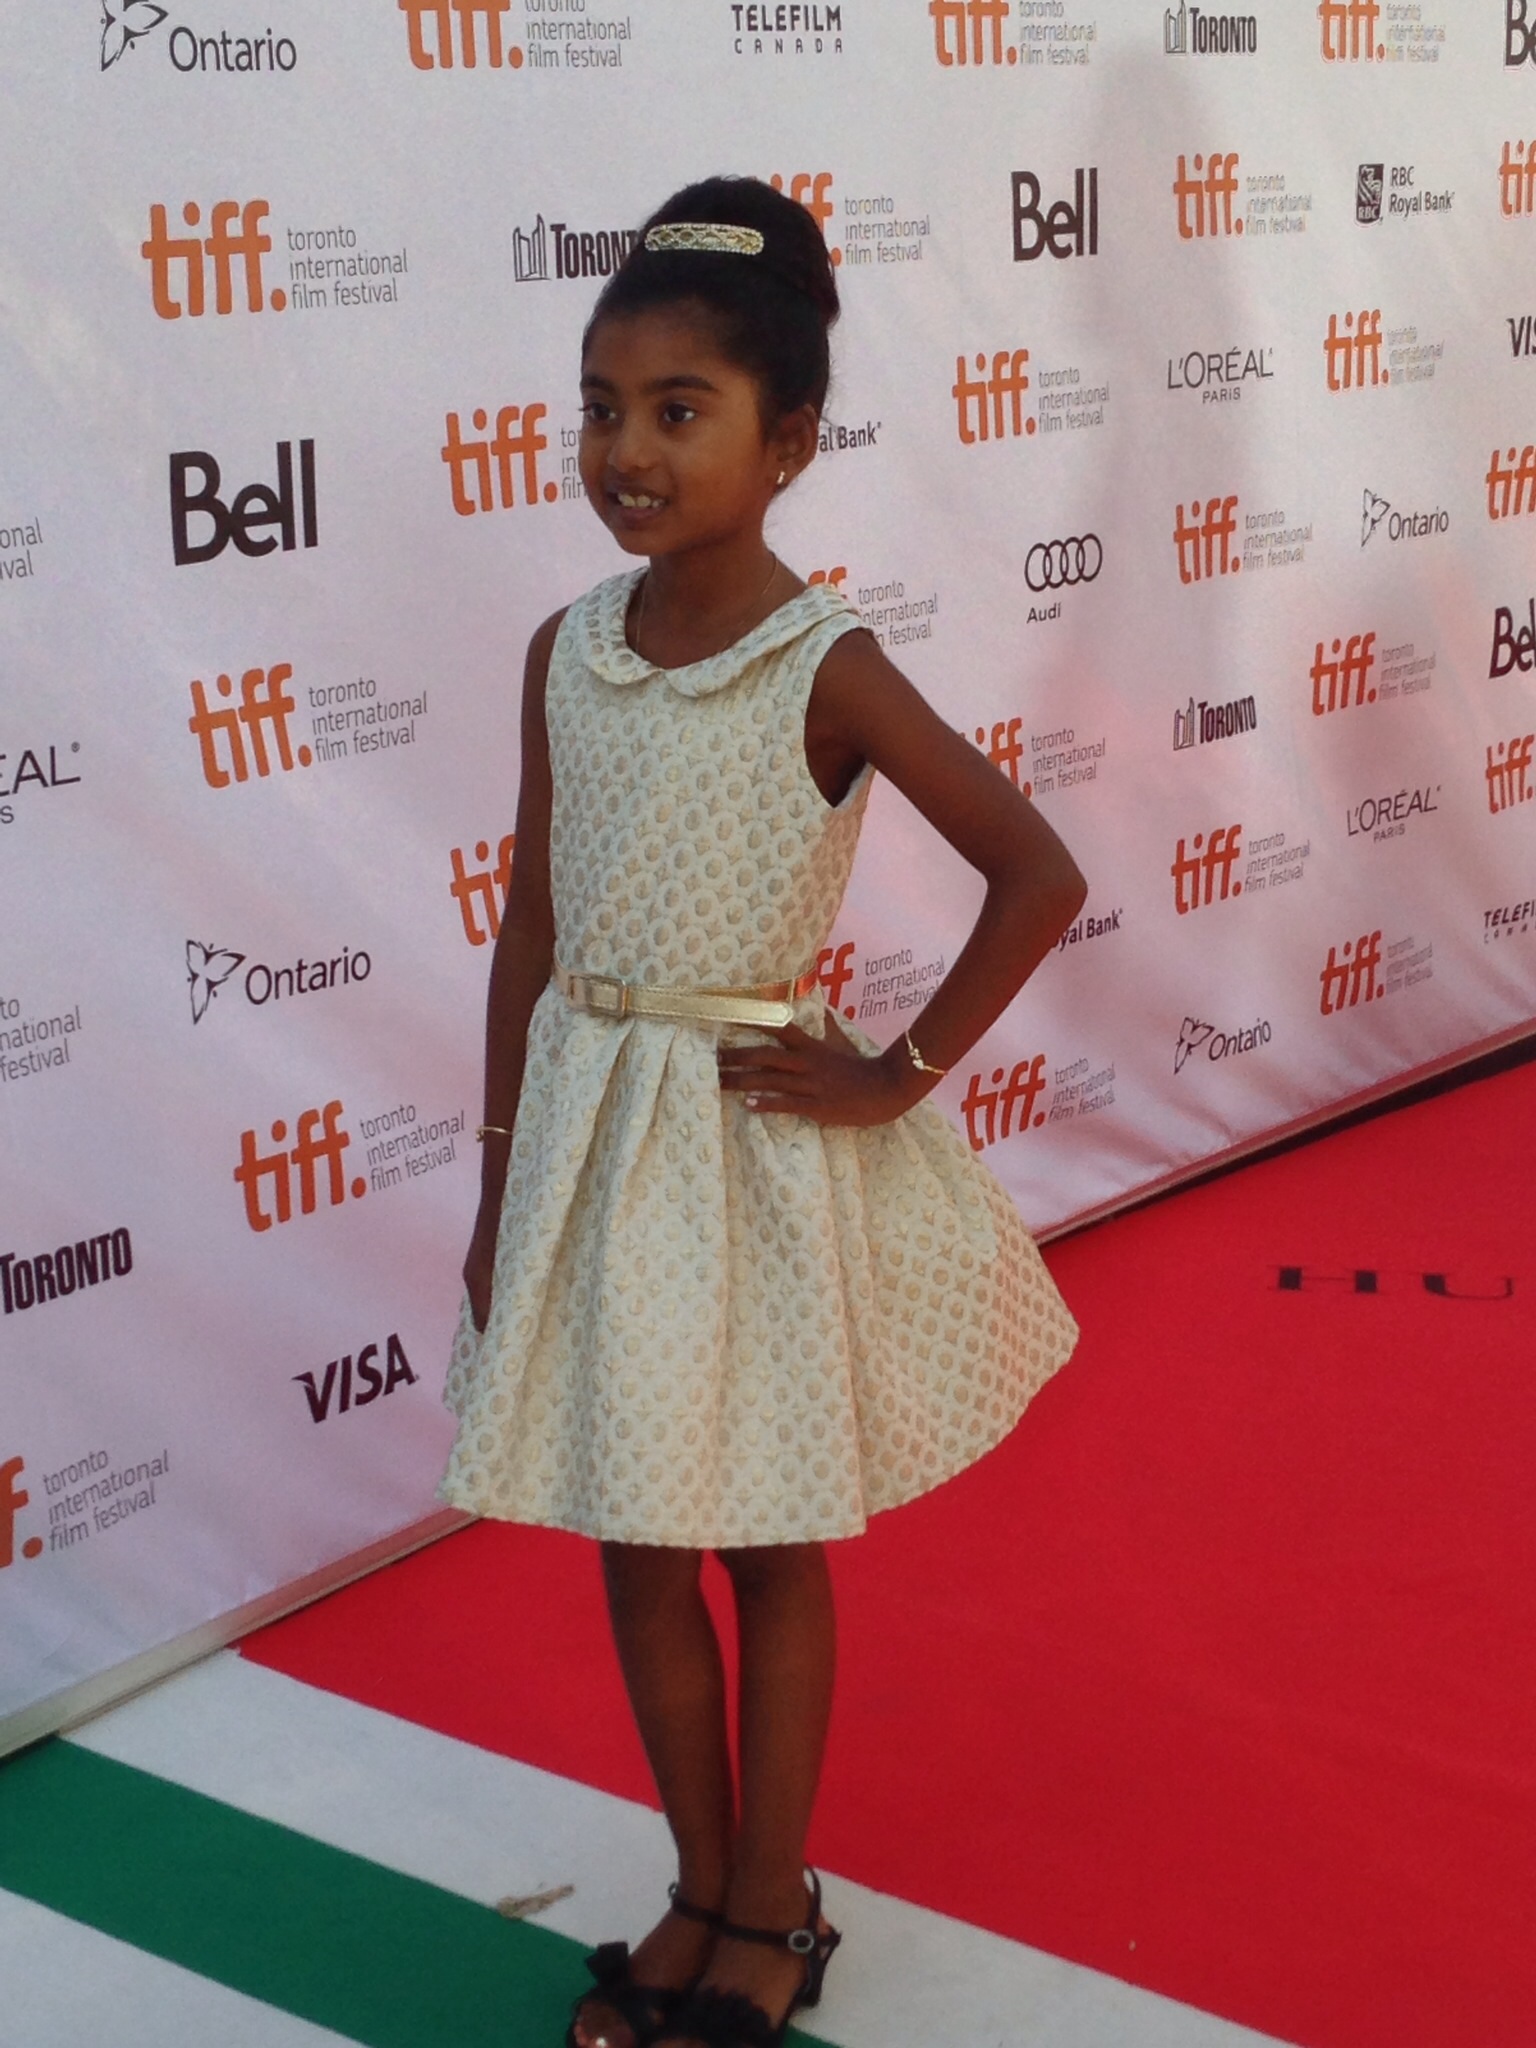 Red carpet at tiff. 2013 for Premier of The Right Kind go Wrong.